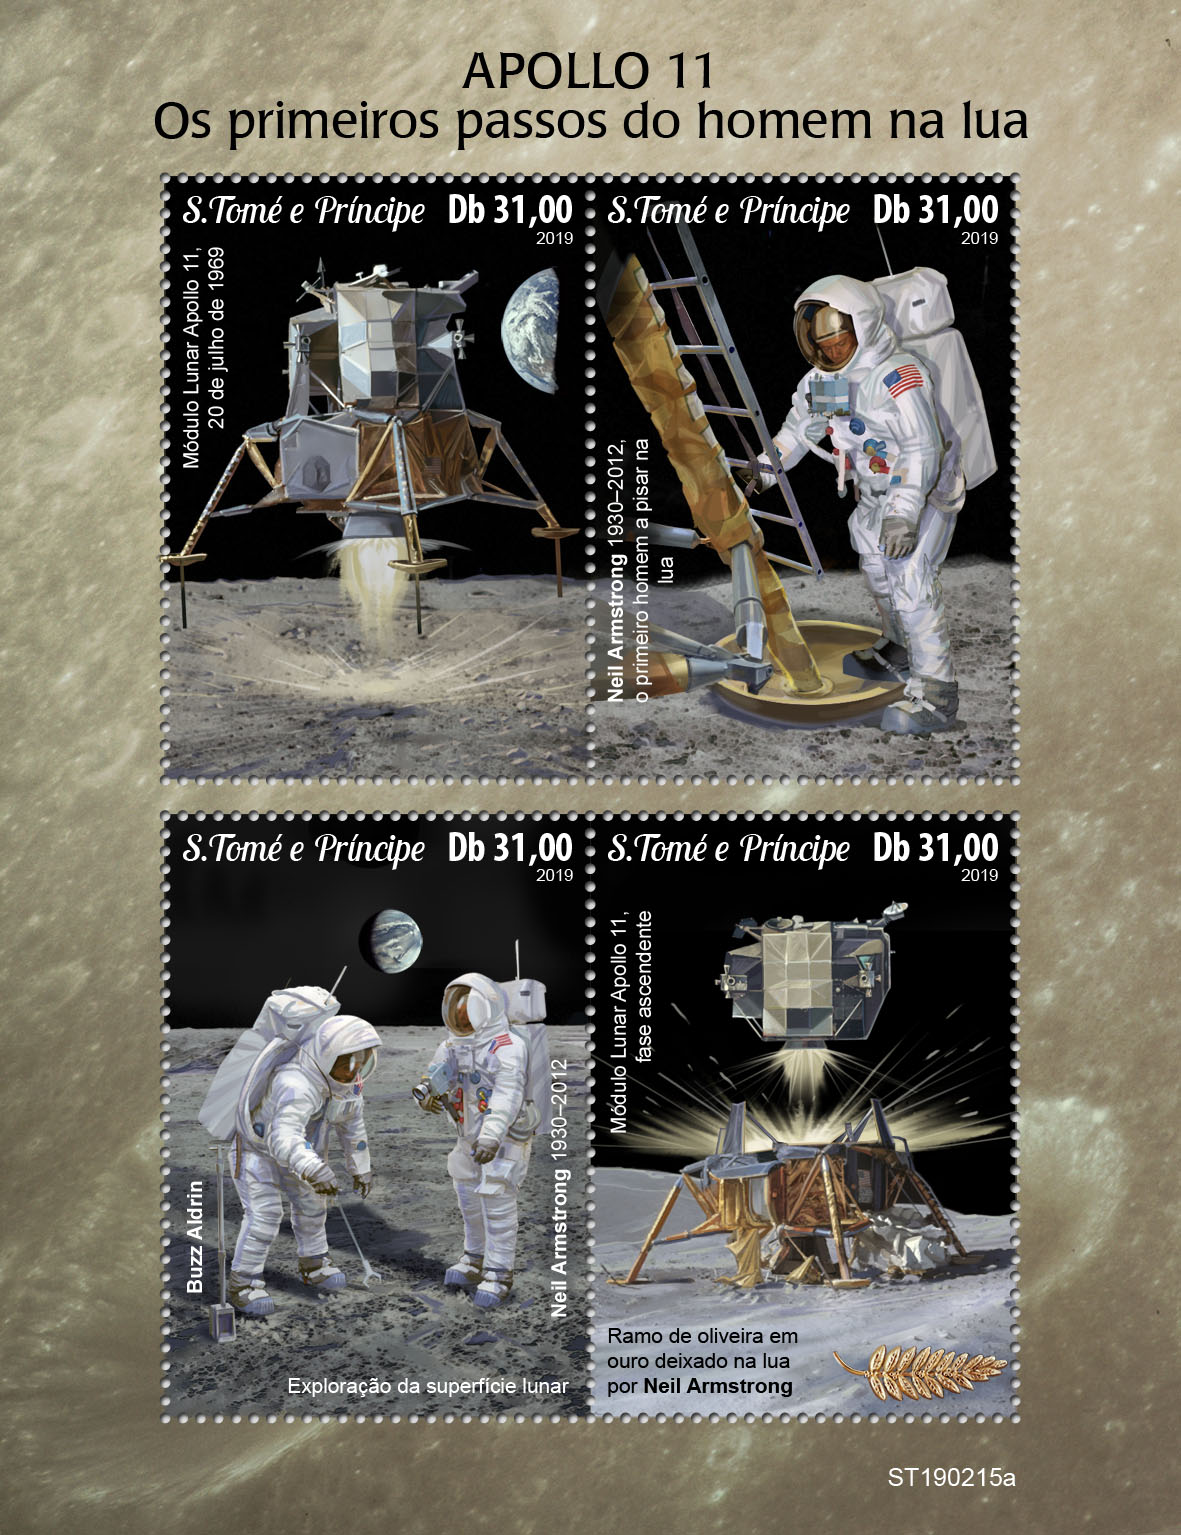 Apollo 11 - Issue of Sao Tome and Principe postage stamps